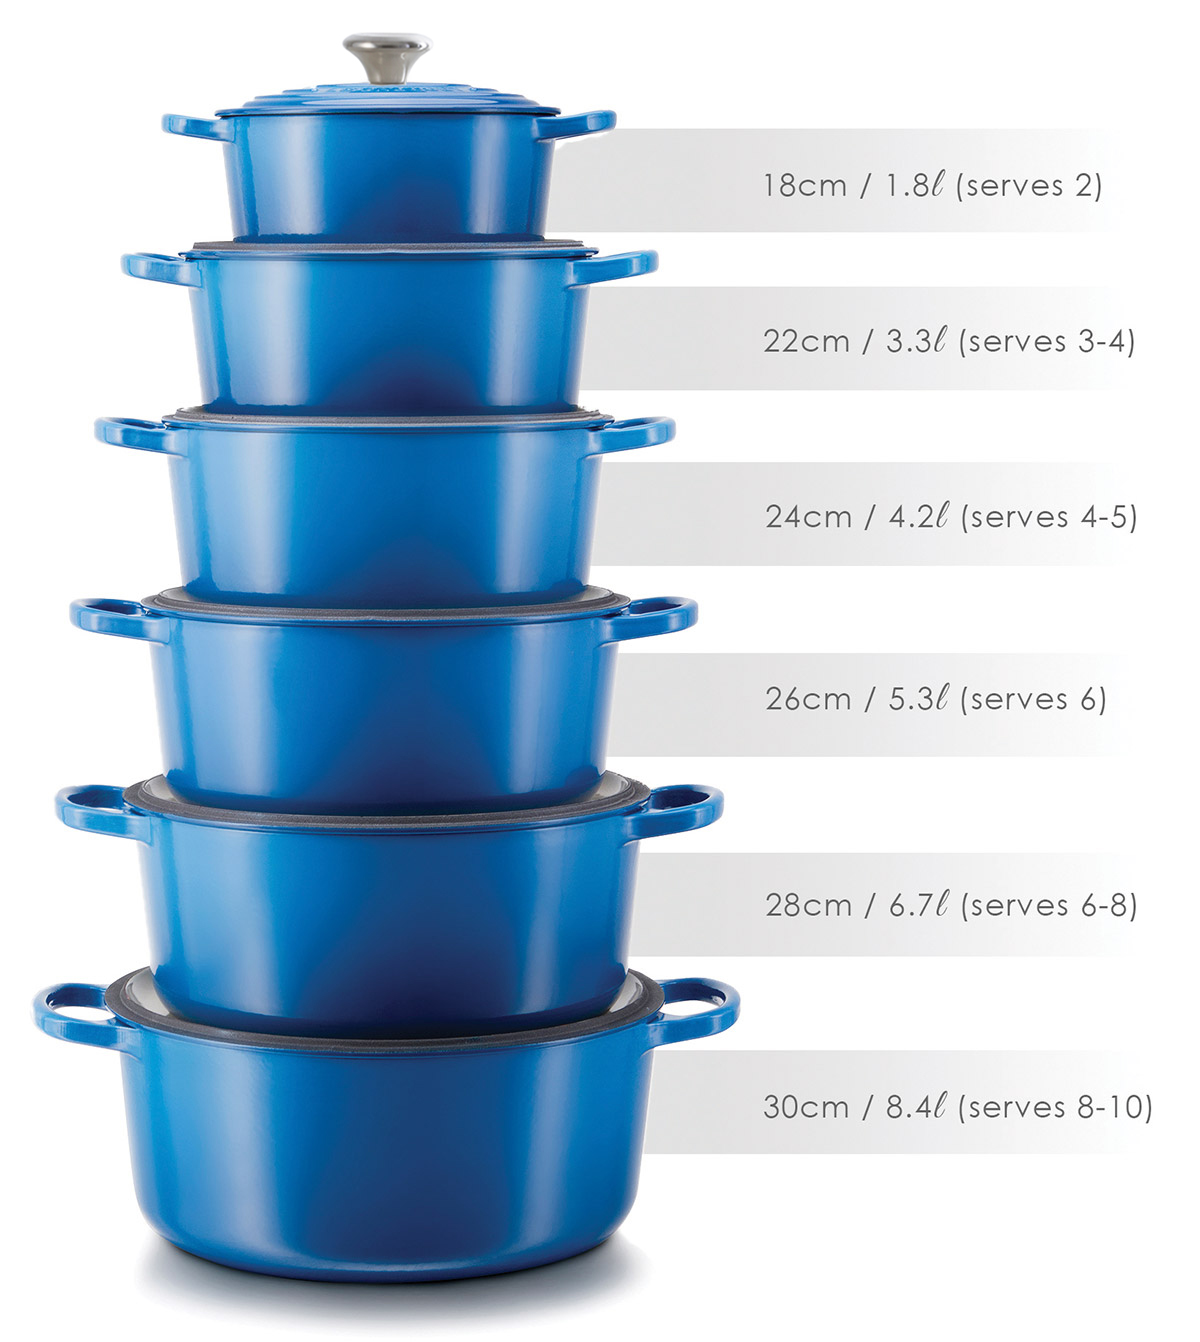 Cooking Pot Sizes Chart